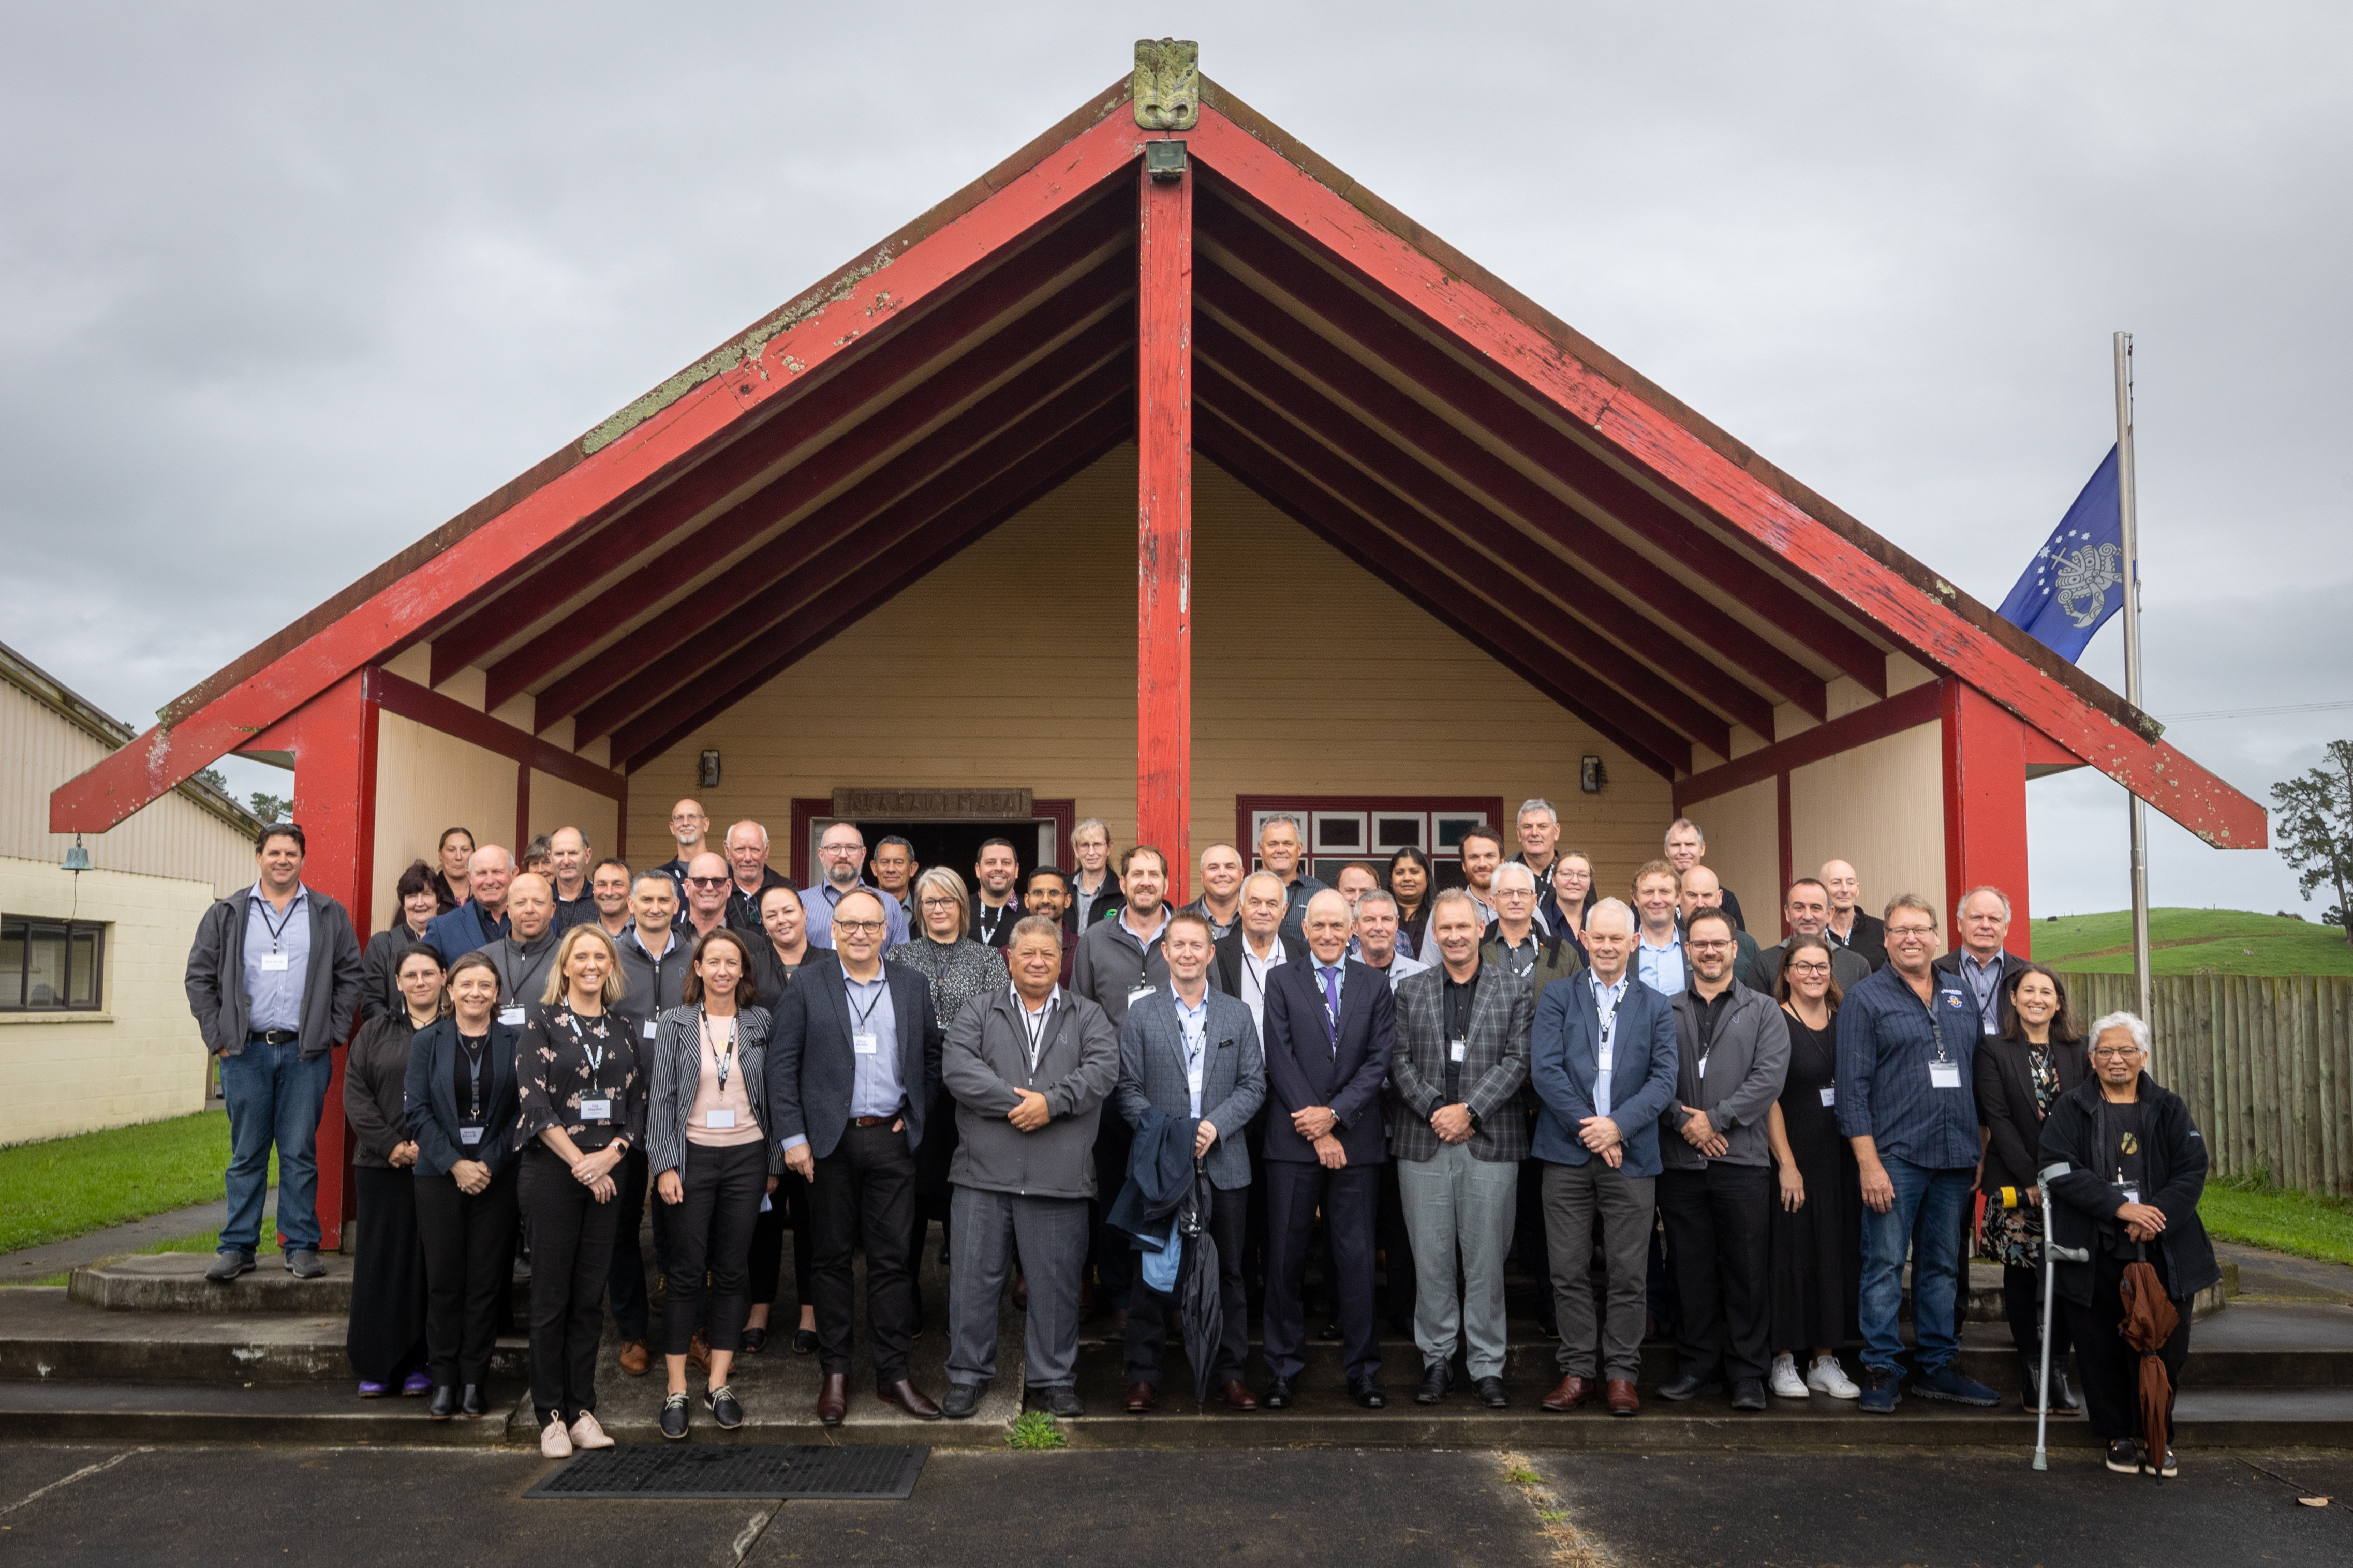 Group photo of attendees of Powerco's commissioning event for the South Waikato National Grid Connection at Mangakaretū Marae